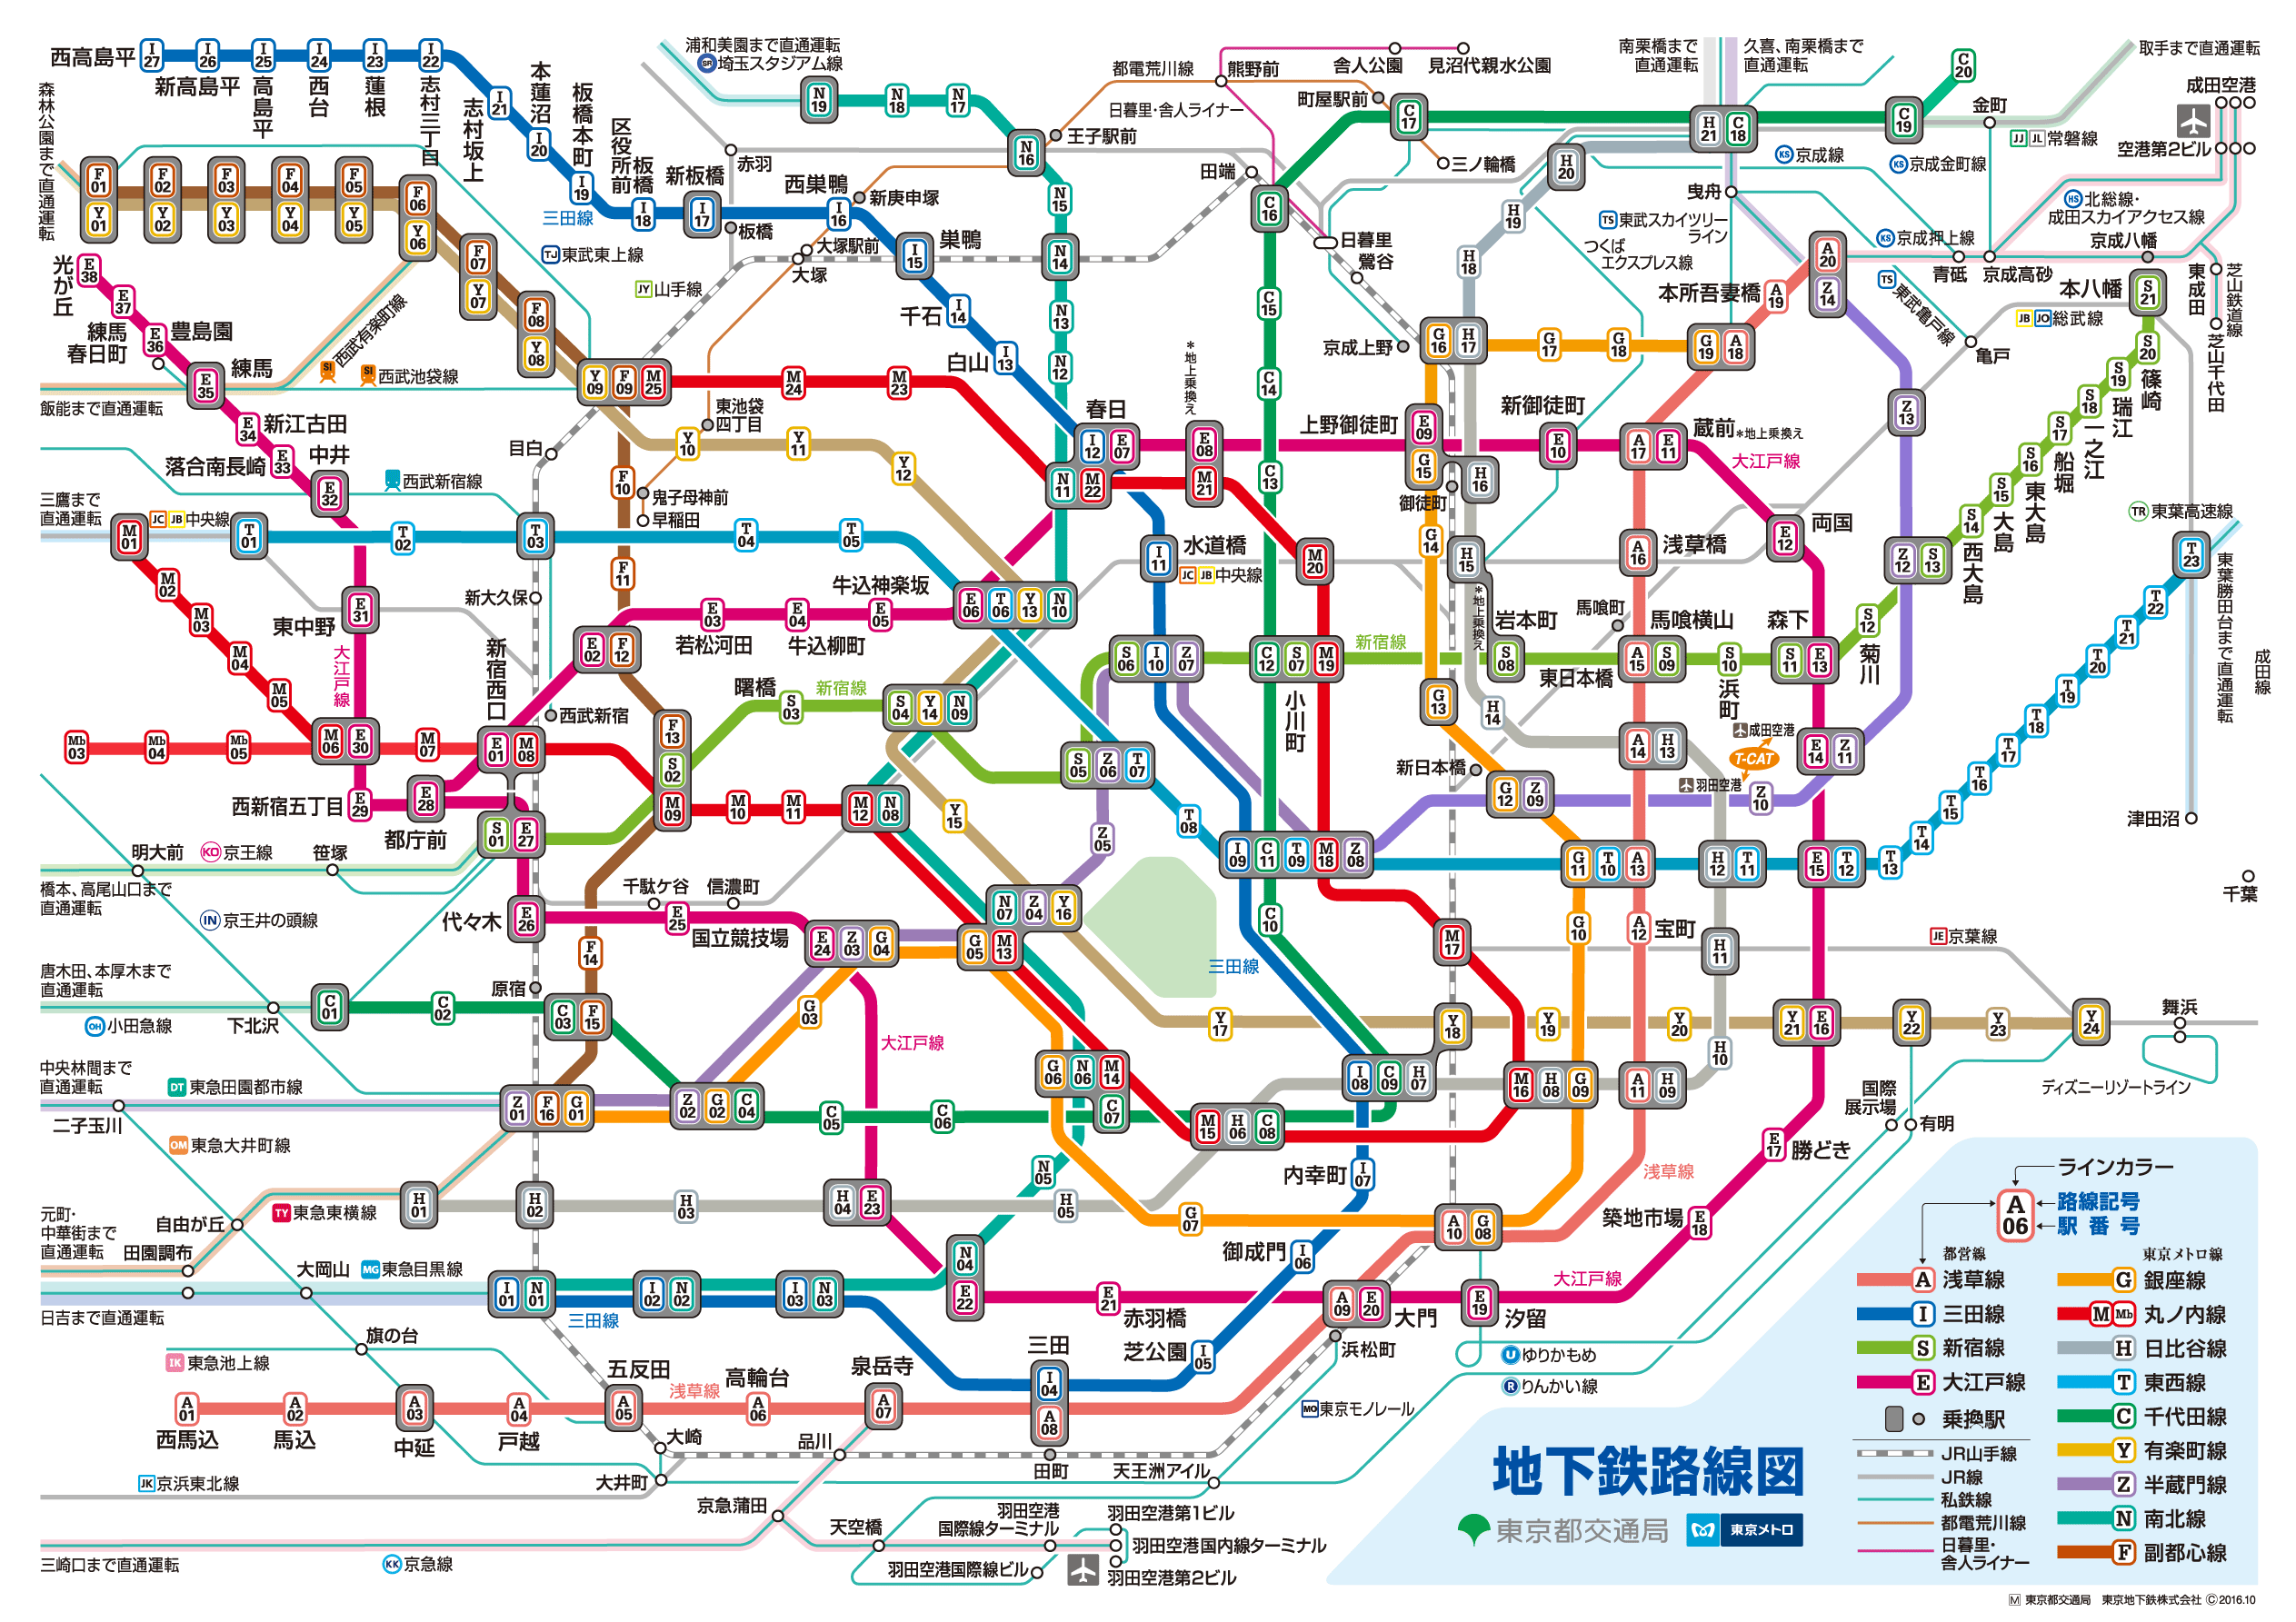 4 steps to get on a local train without knowing how to buy a ticket and railway route chart in Japan